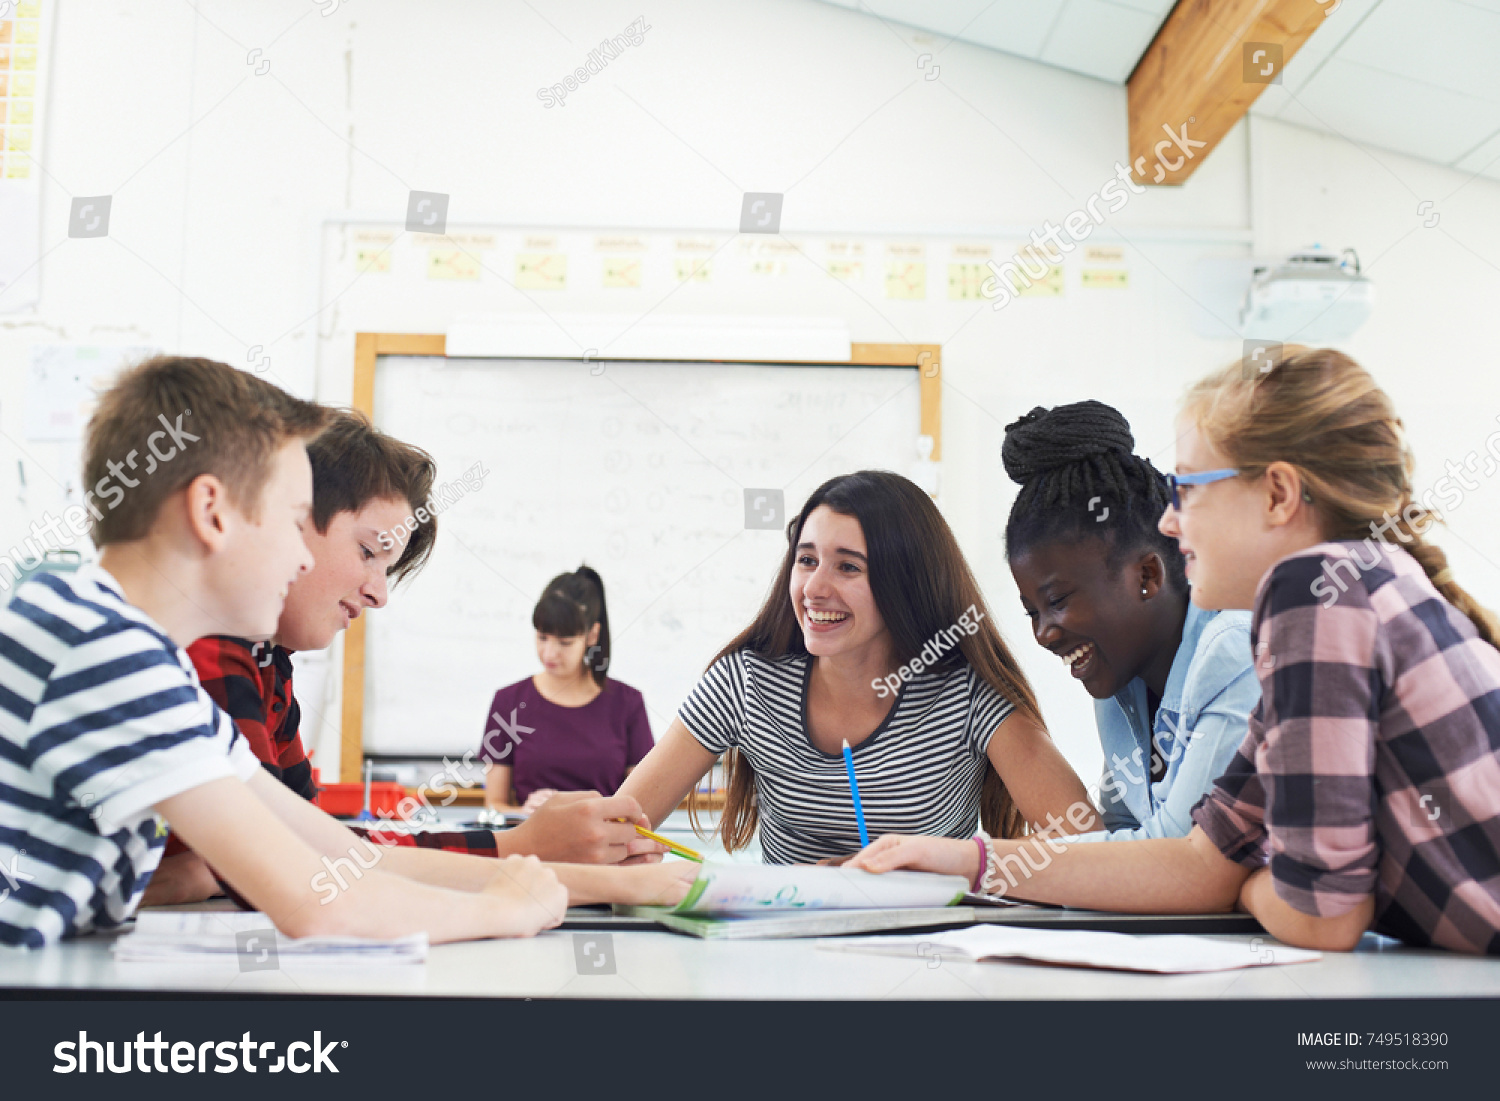 Group Of Teenage Students Collaborating On Project In Classroom #749518390